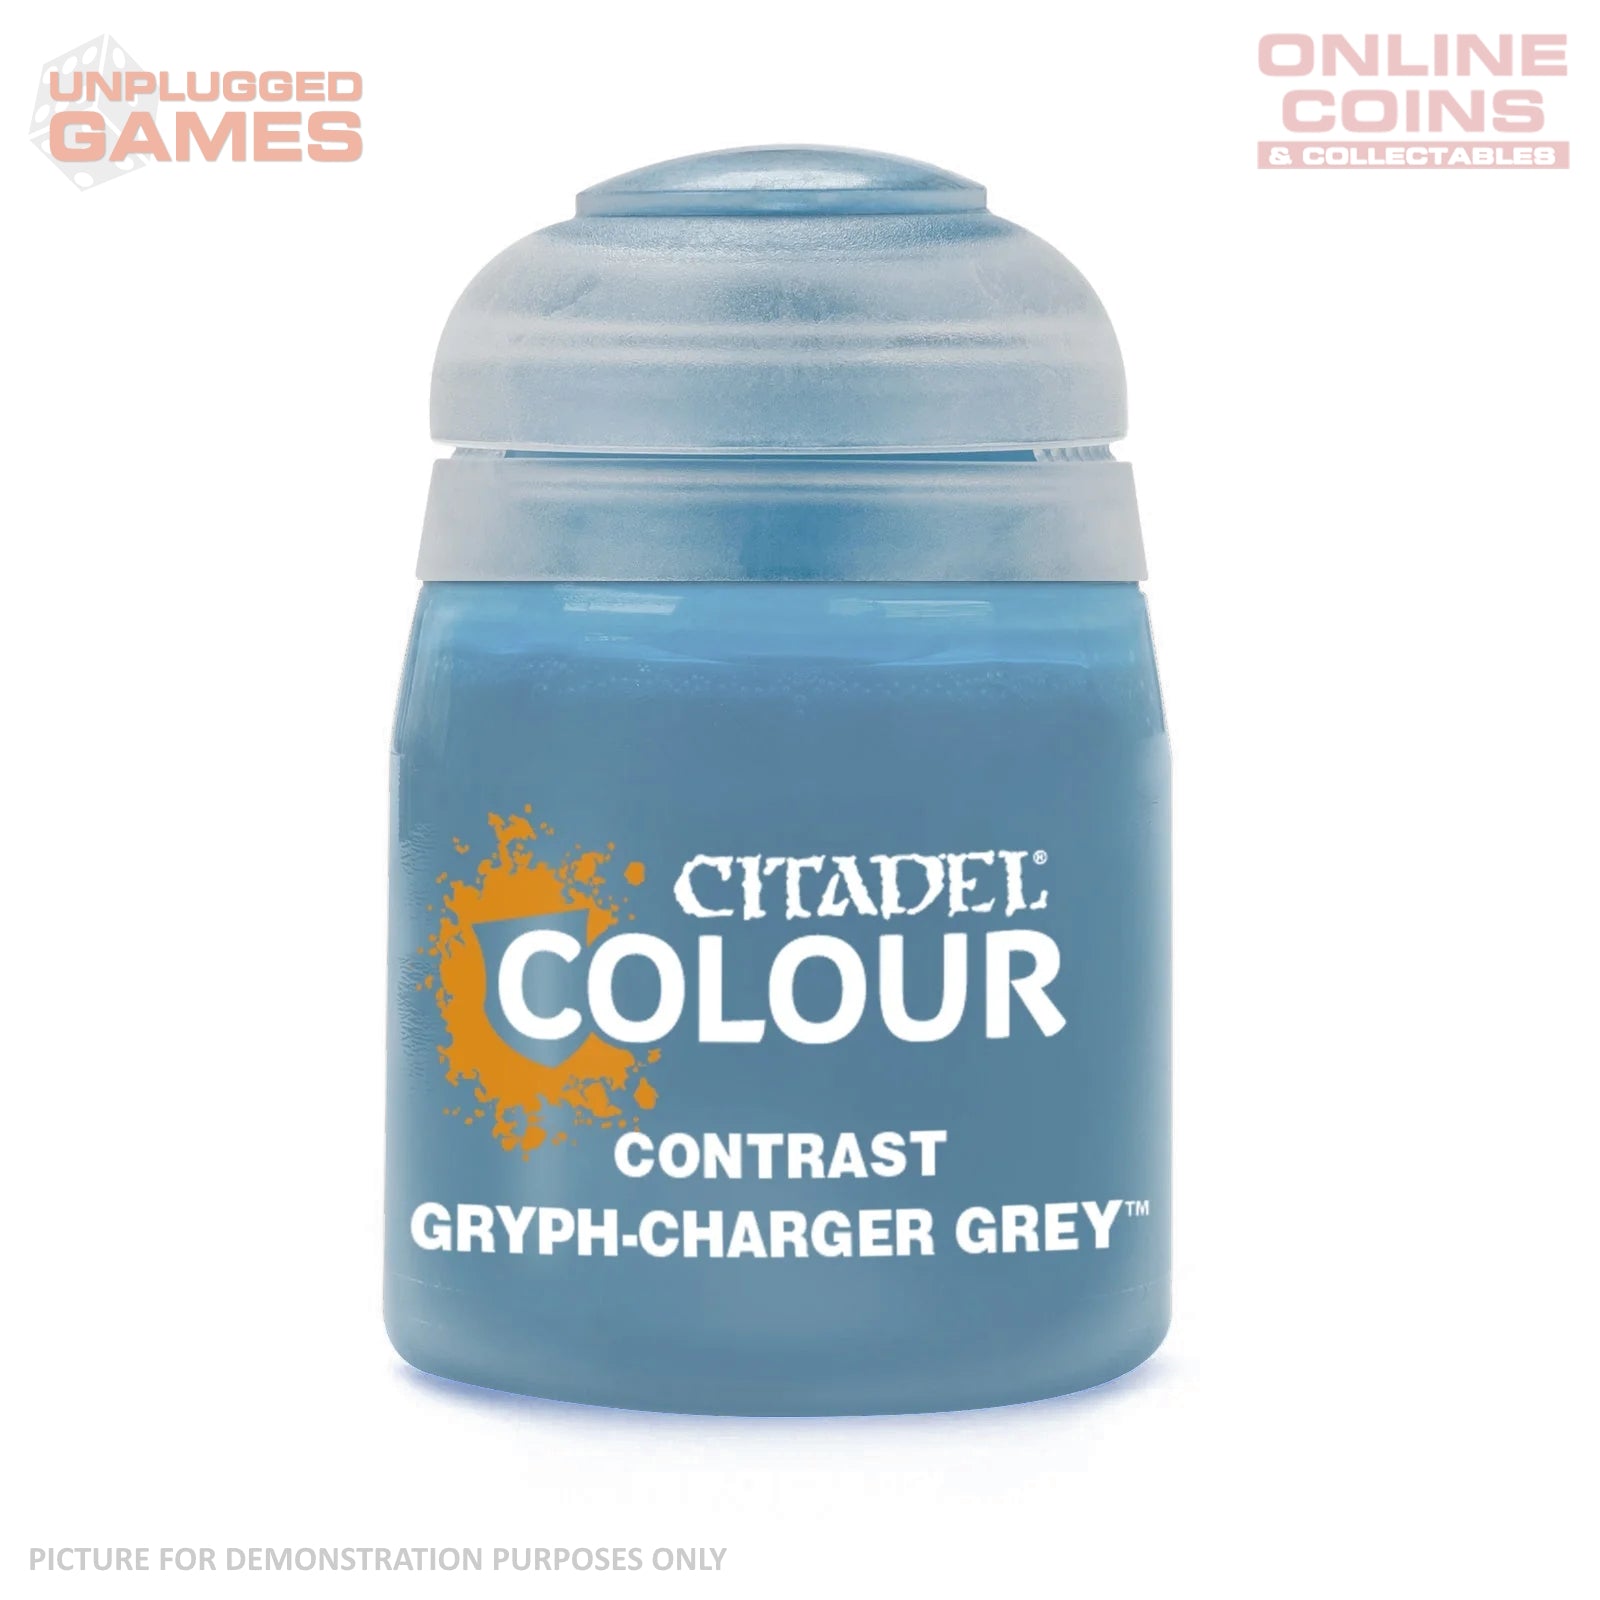 Citadel Contrast - 29-35 Gryph-Charger Grey